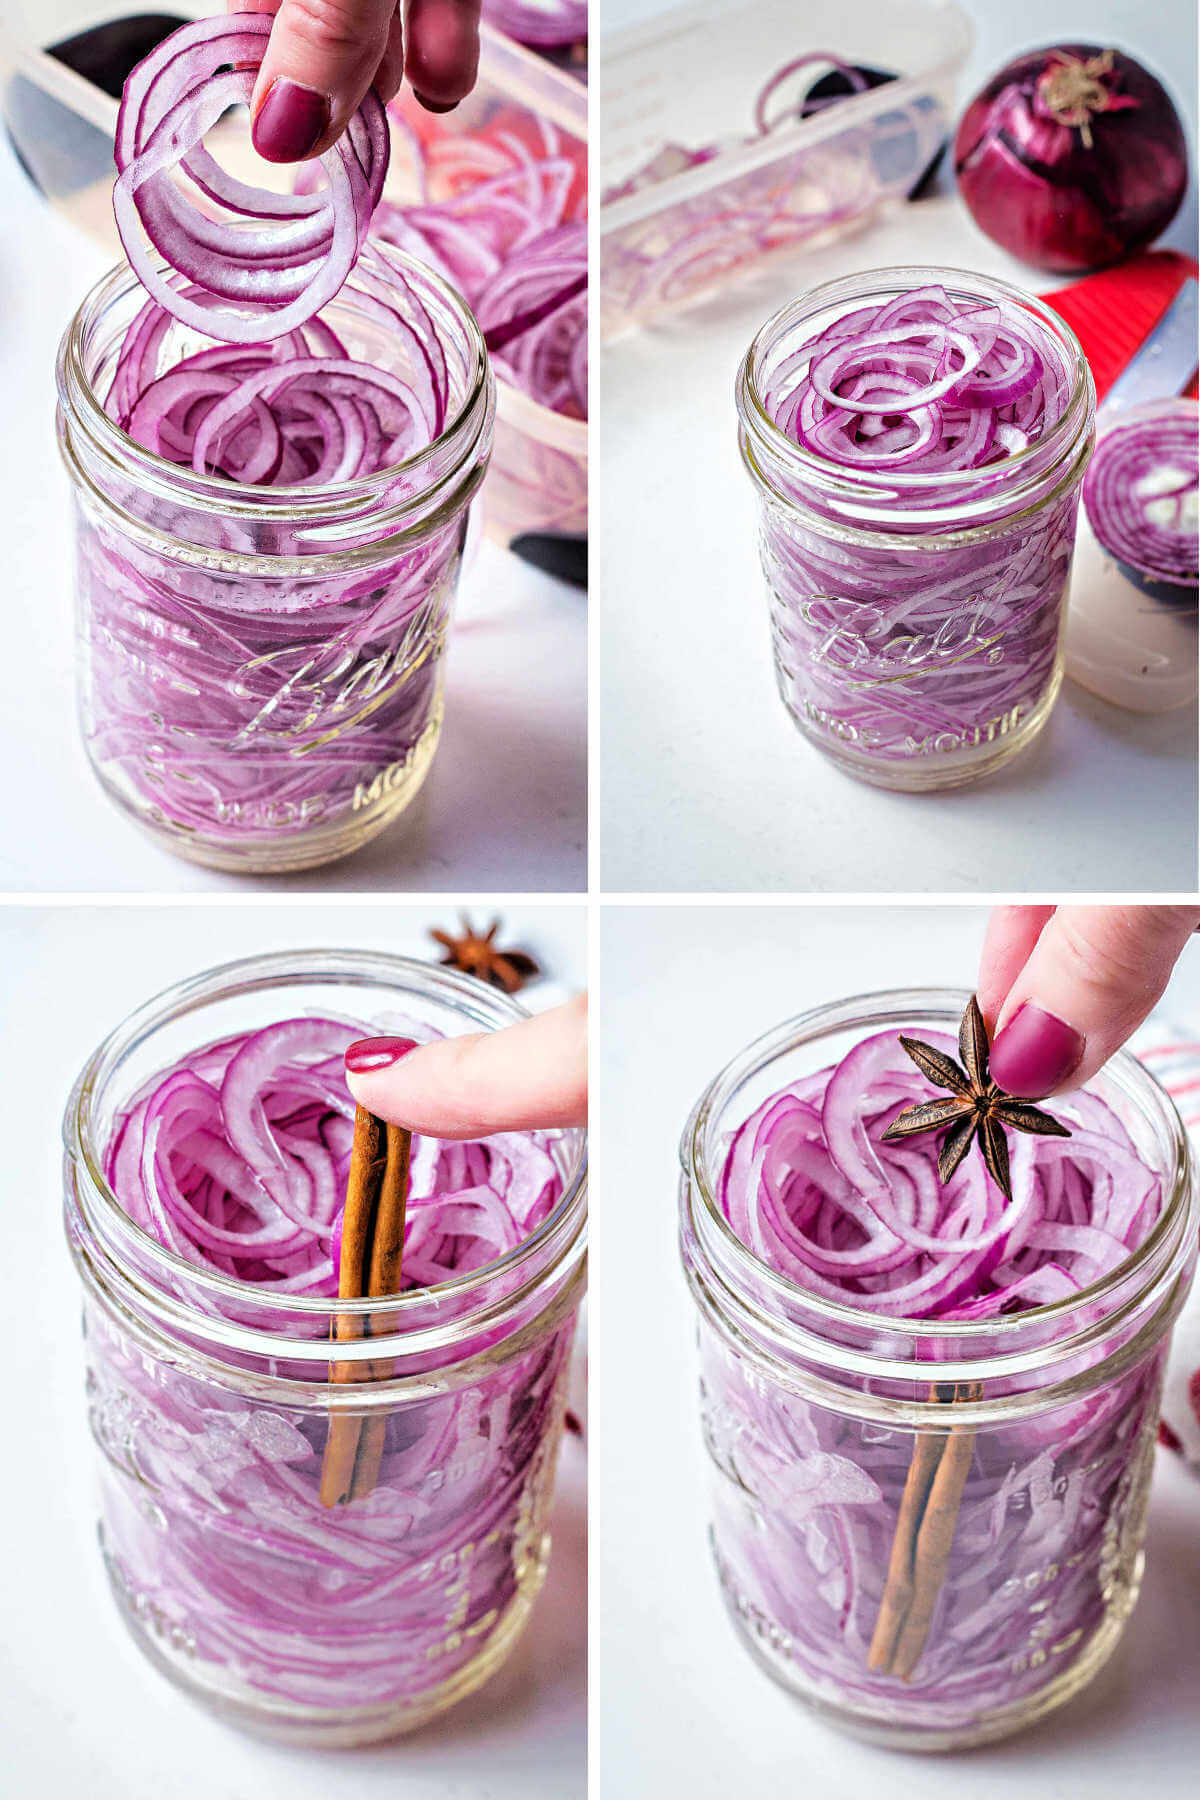 packing red onion slices into a mason jar with a stick of cinnamon and star anise.